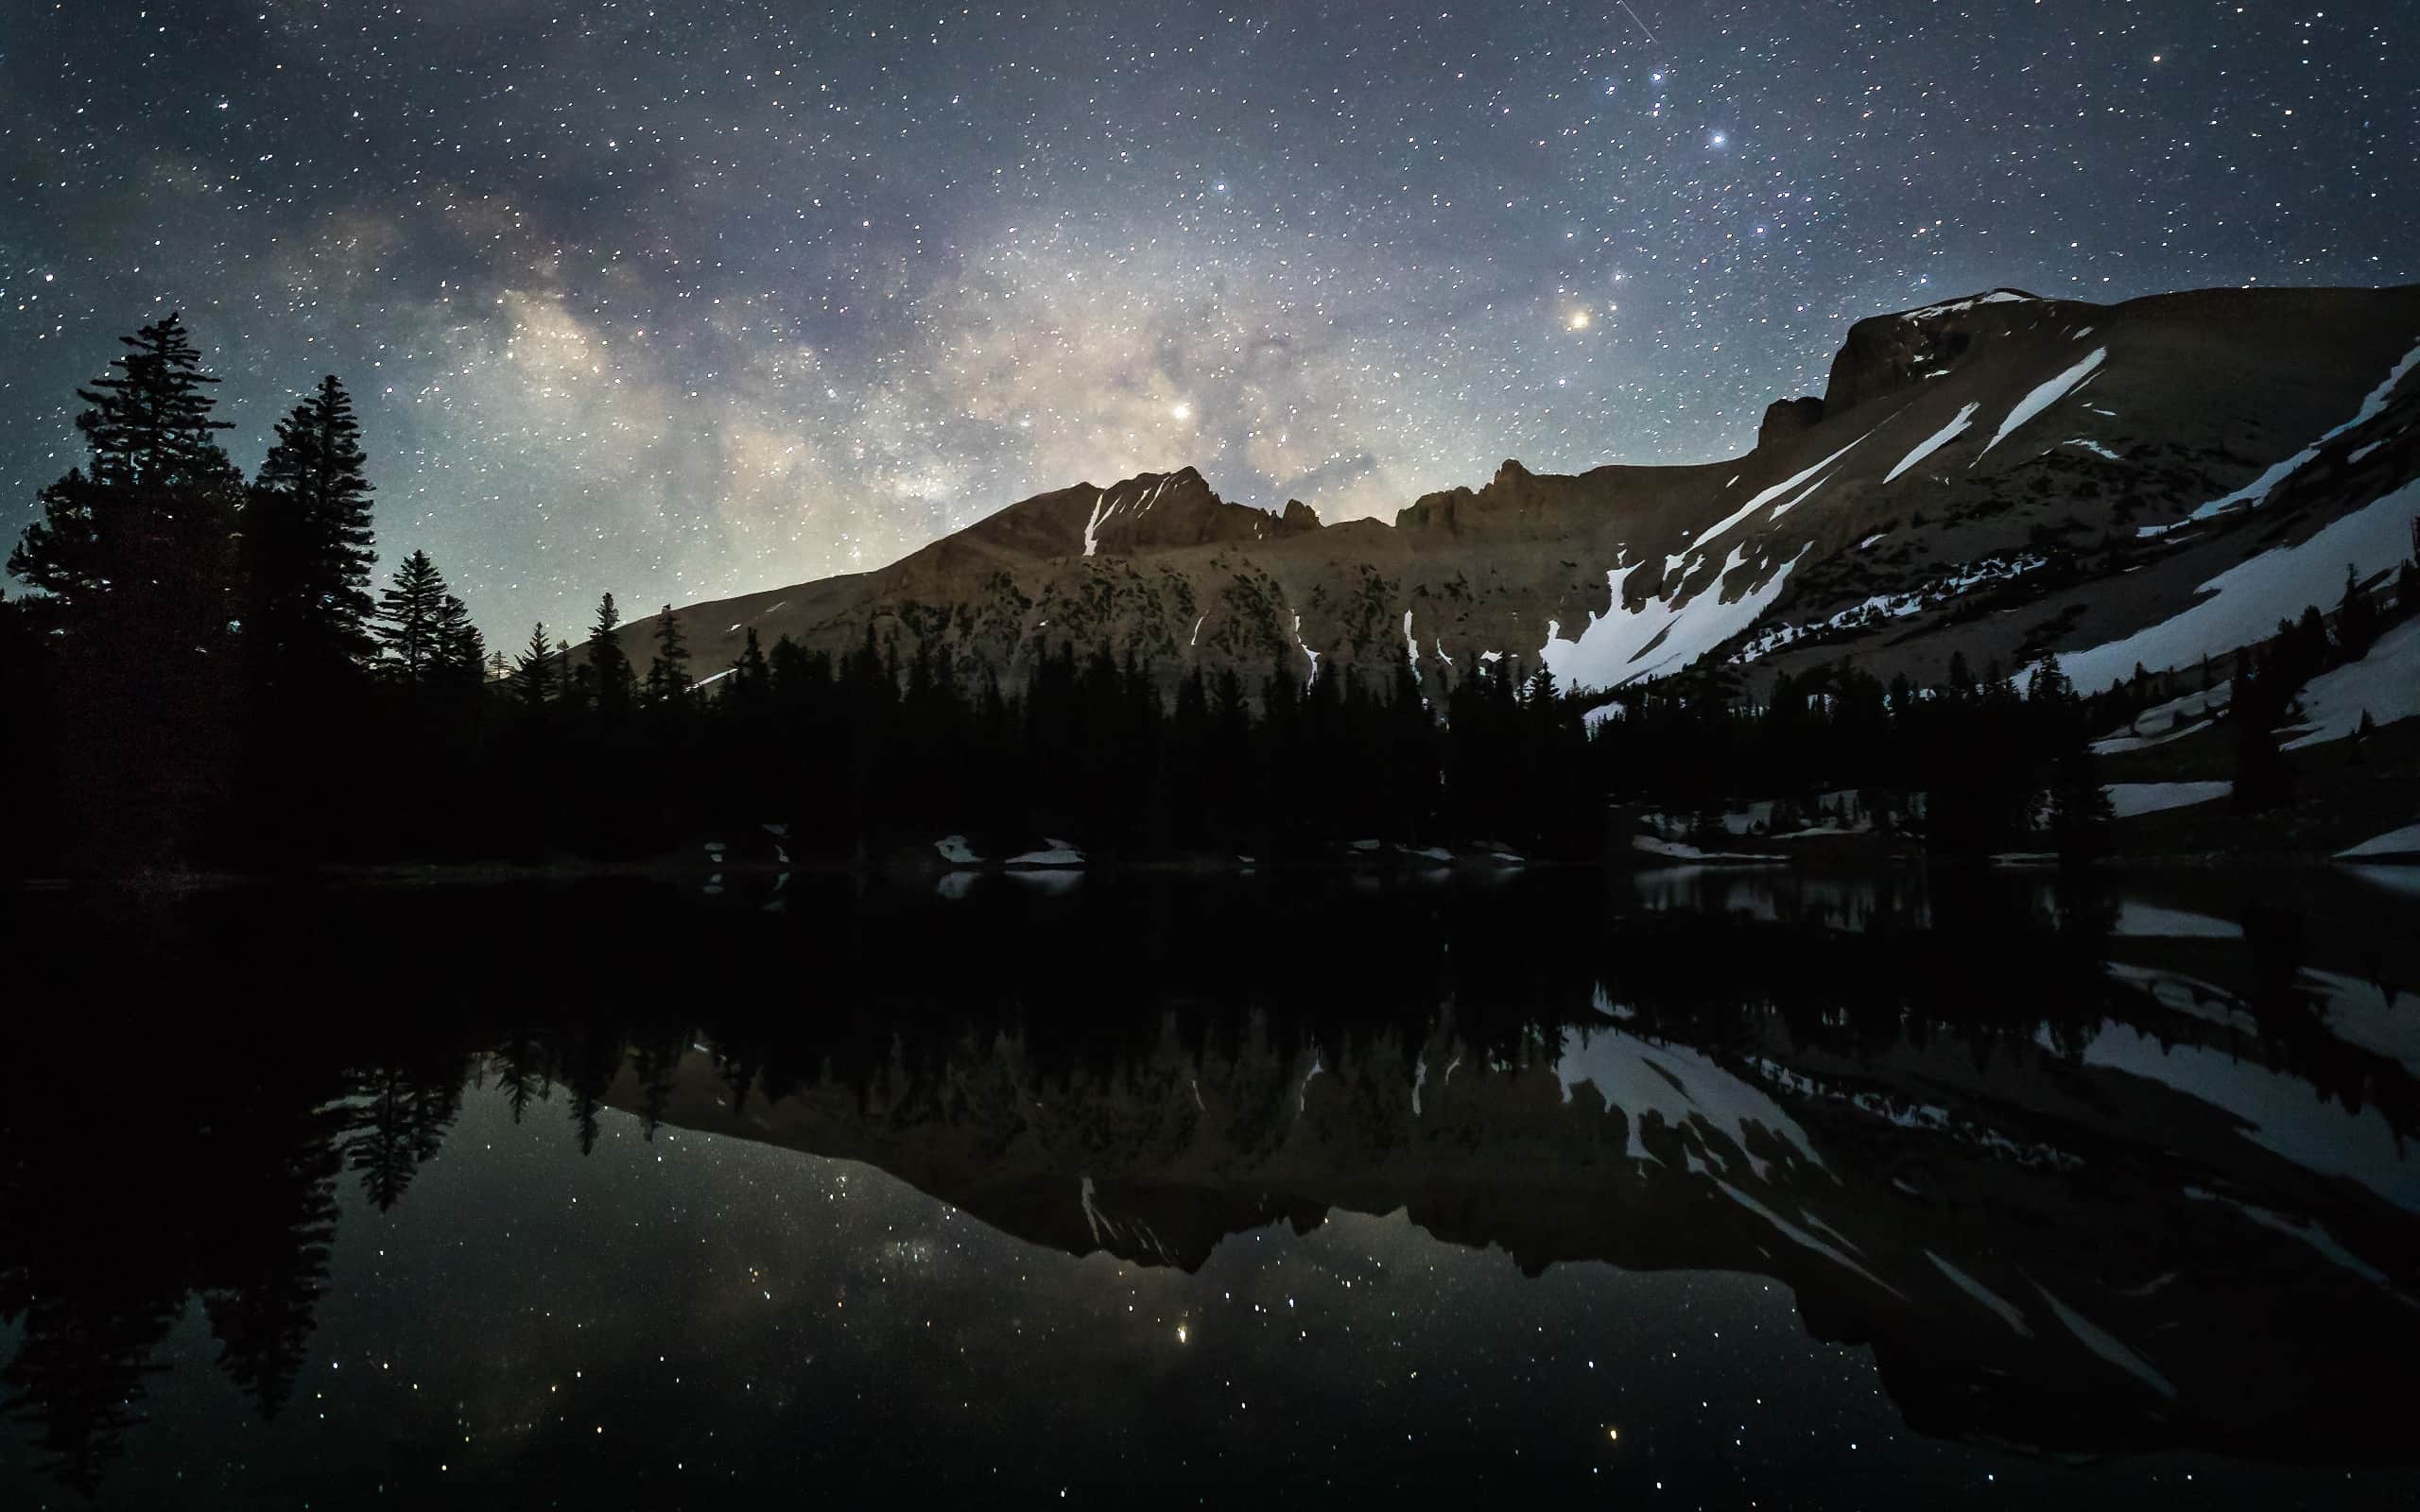 Milky Way reflected in mountain lake